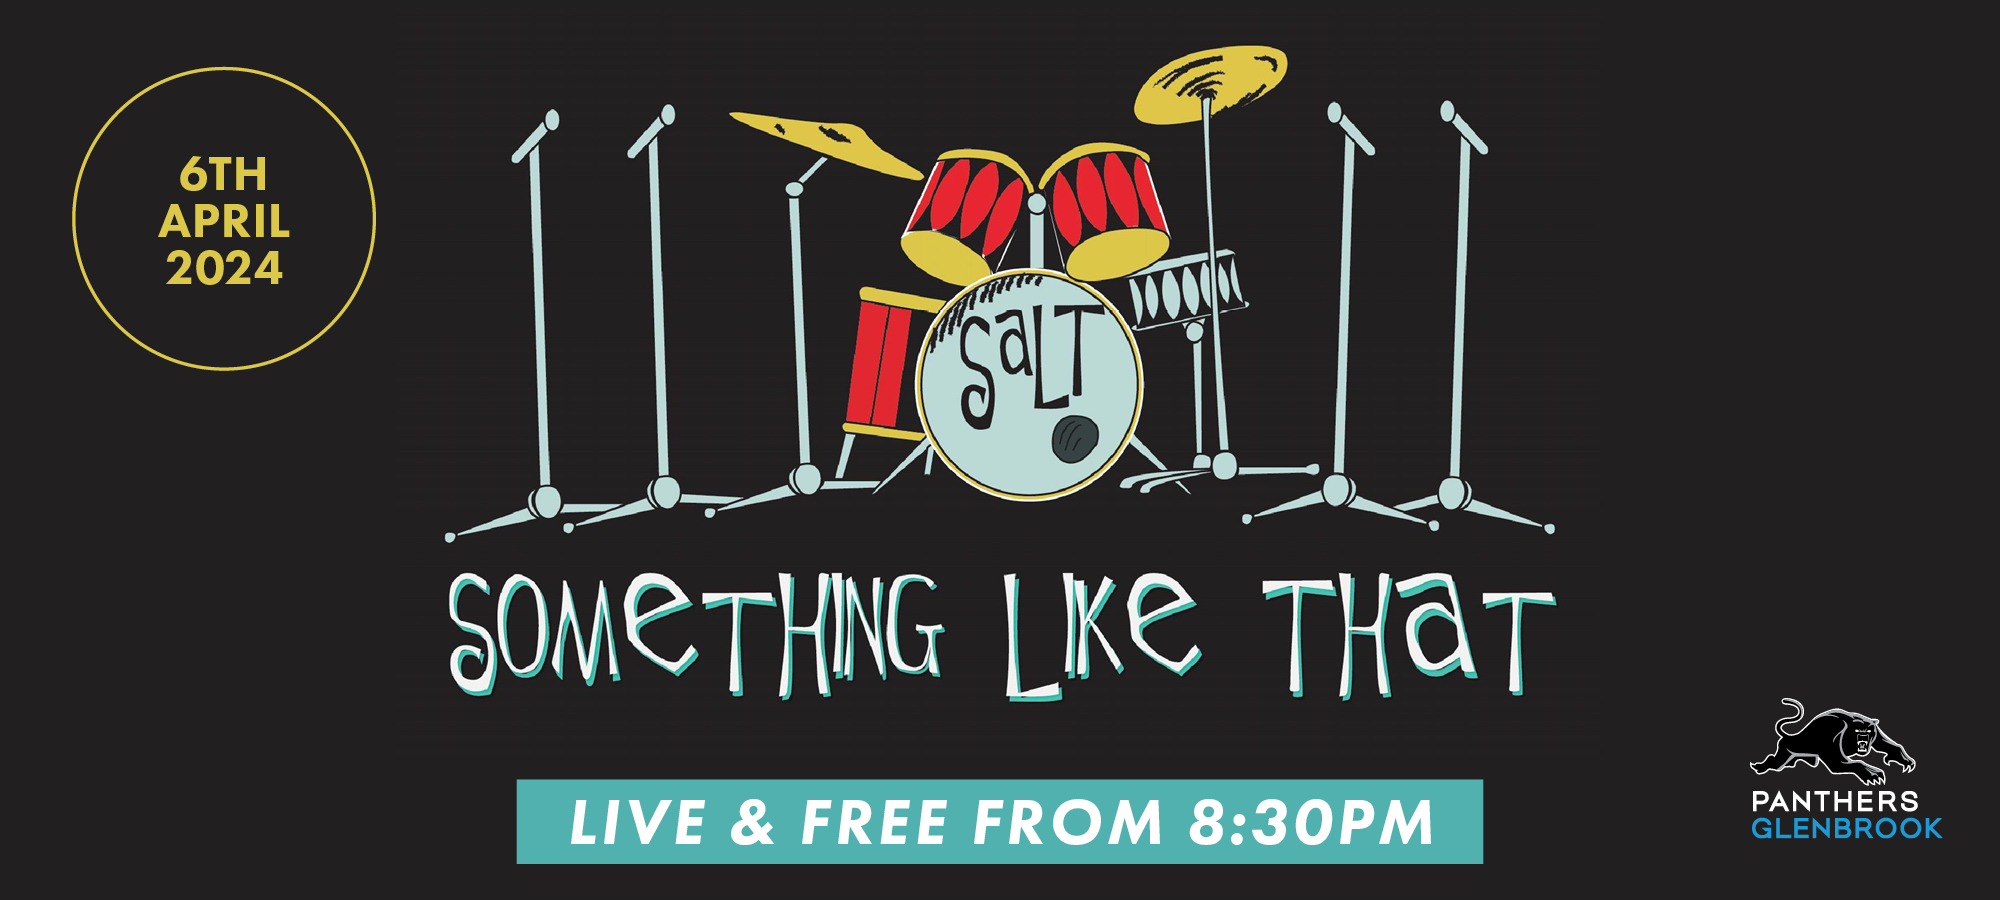 Something Like That (SaLT) – Saturday Live Entertainment in April